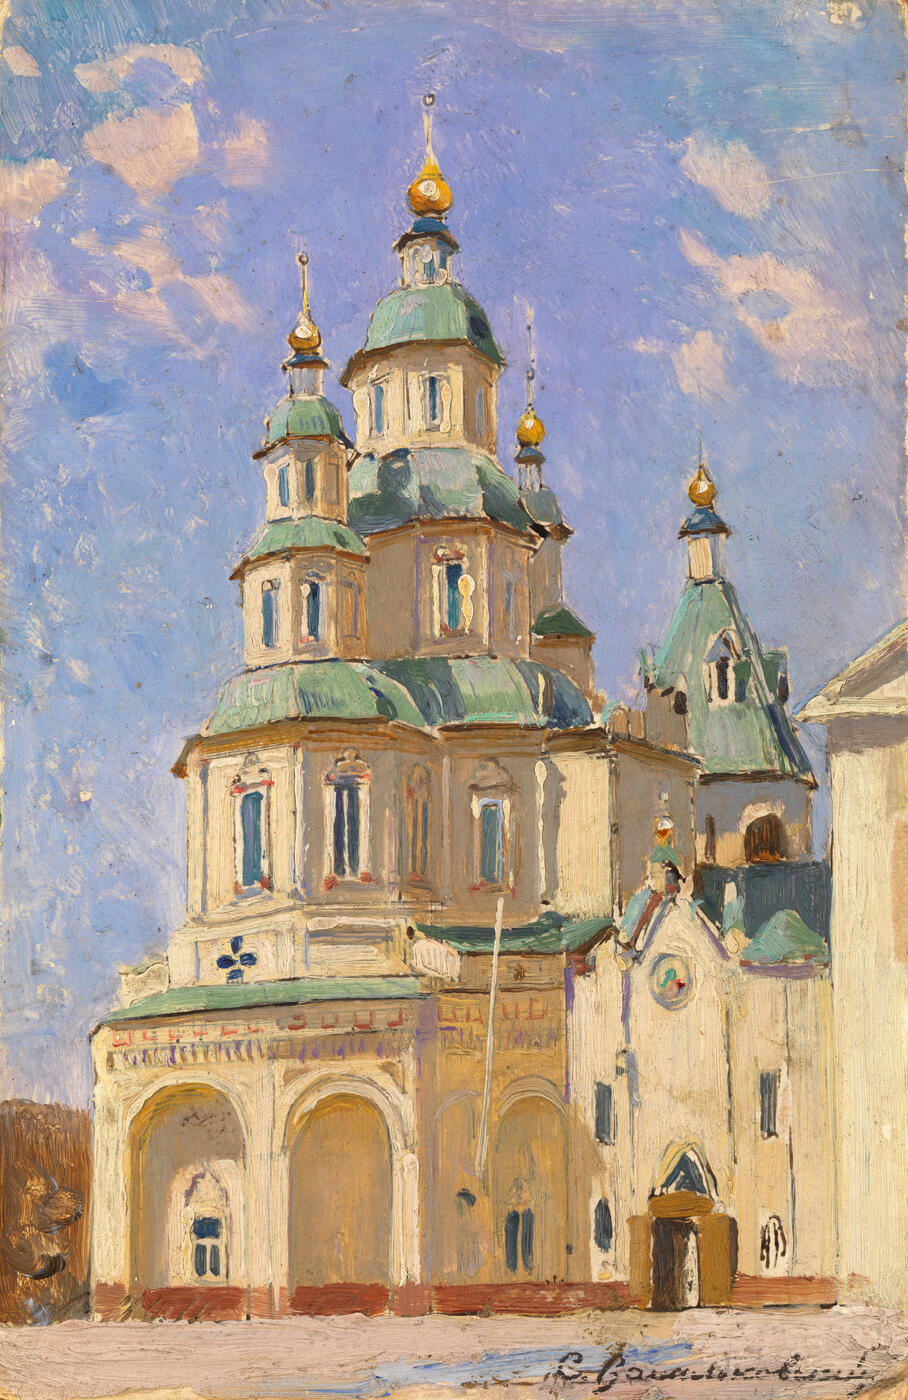 View of a Church on a Sunny Day